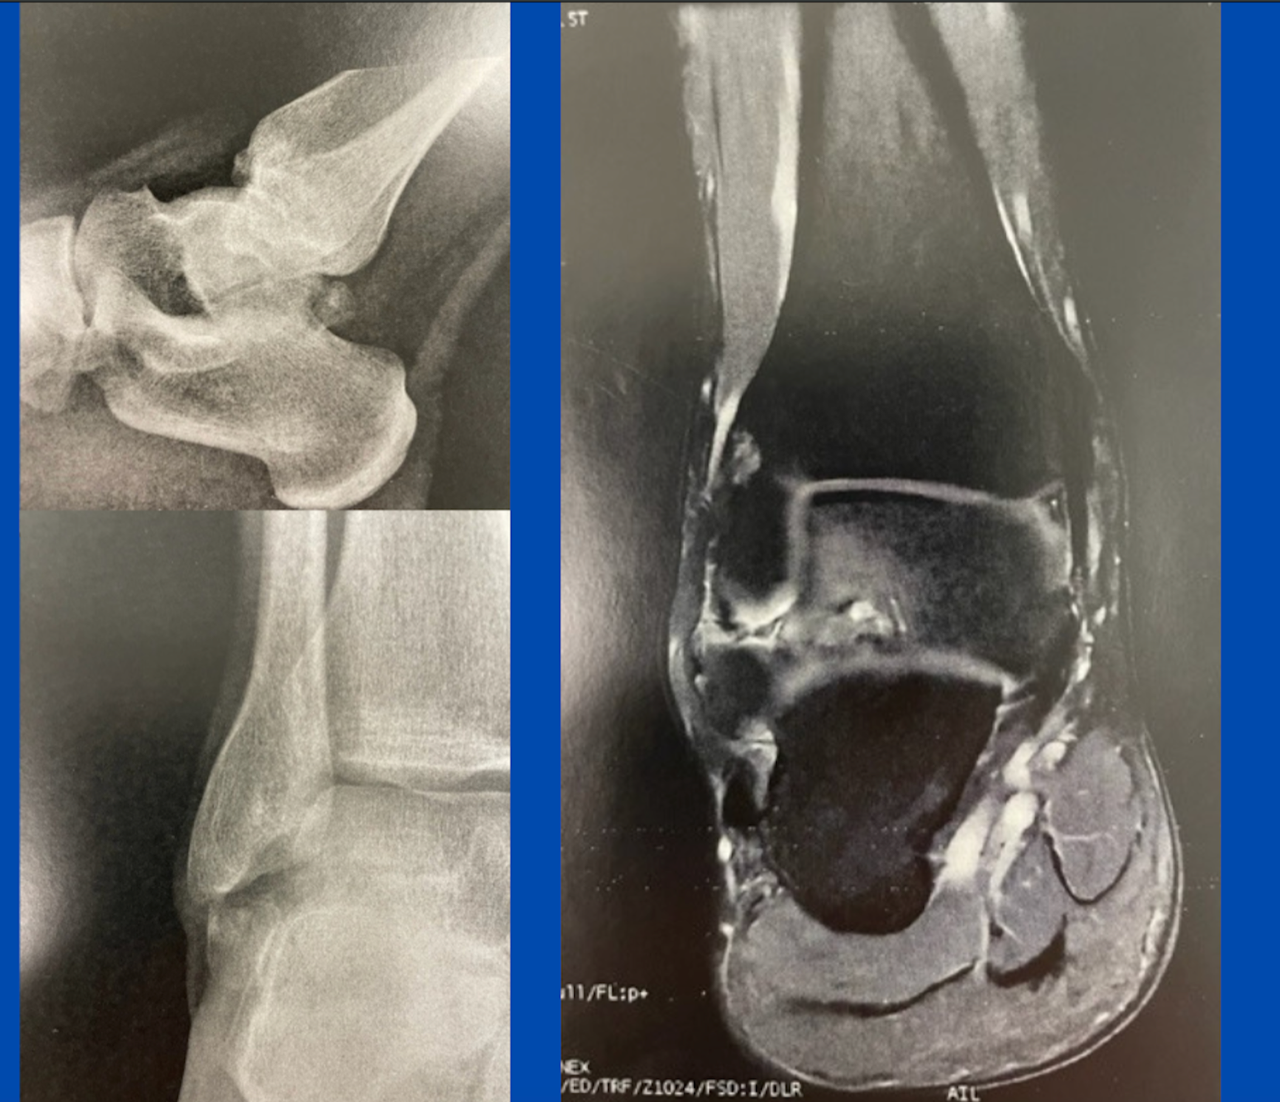 X-ray and MRI imagery showing a patient's ankle; images by Sydney Foot and Ankle Surgeon Damien Lafferty